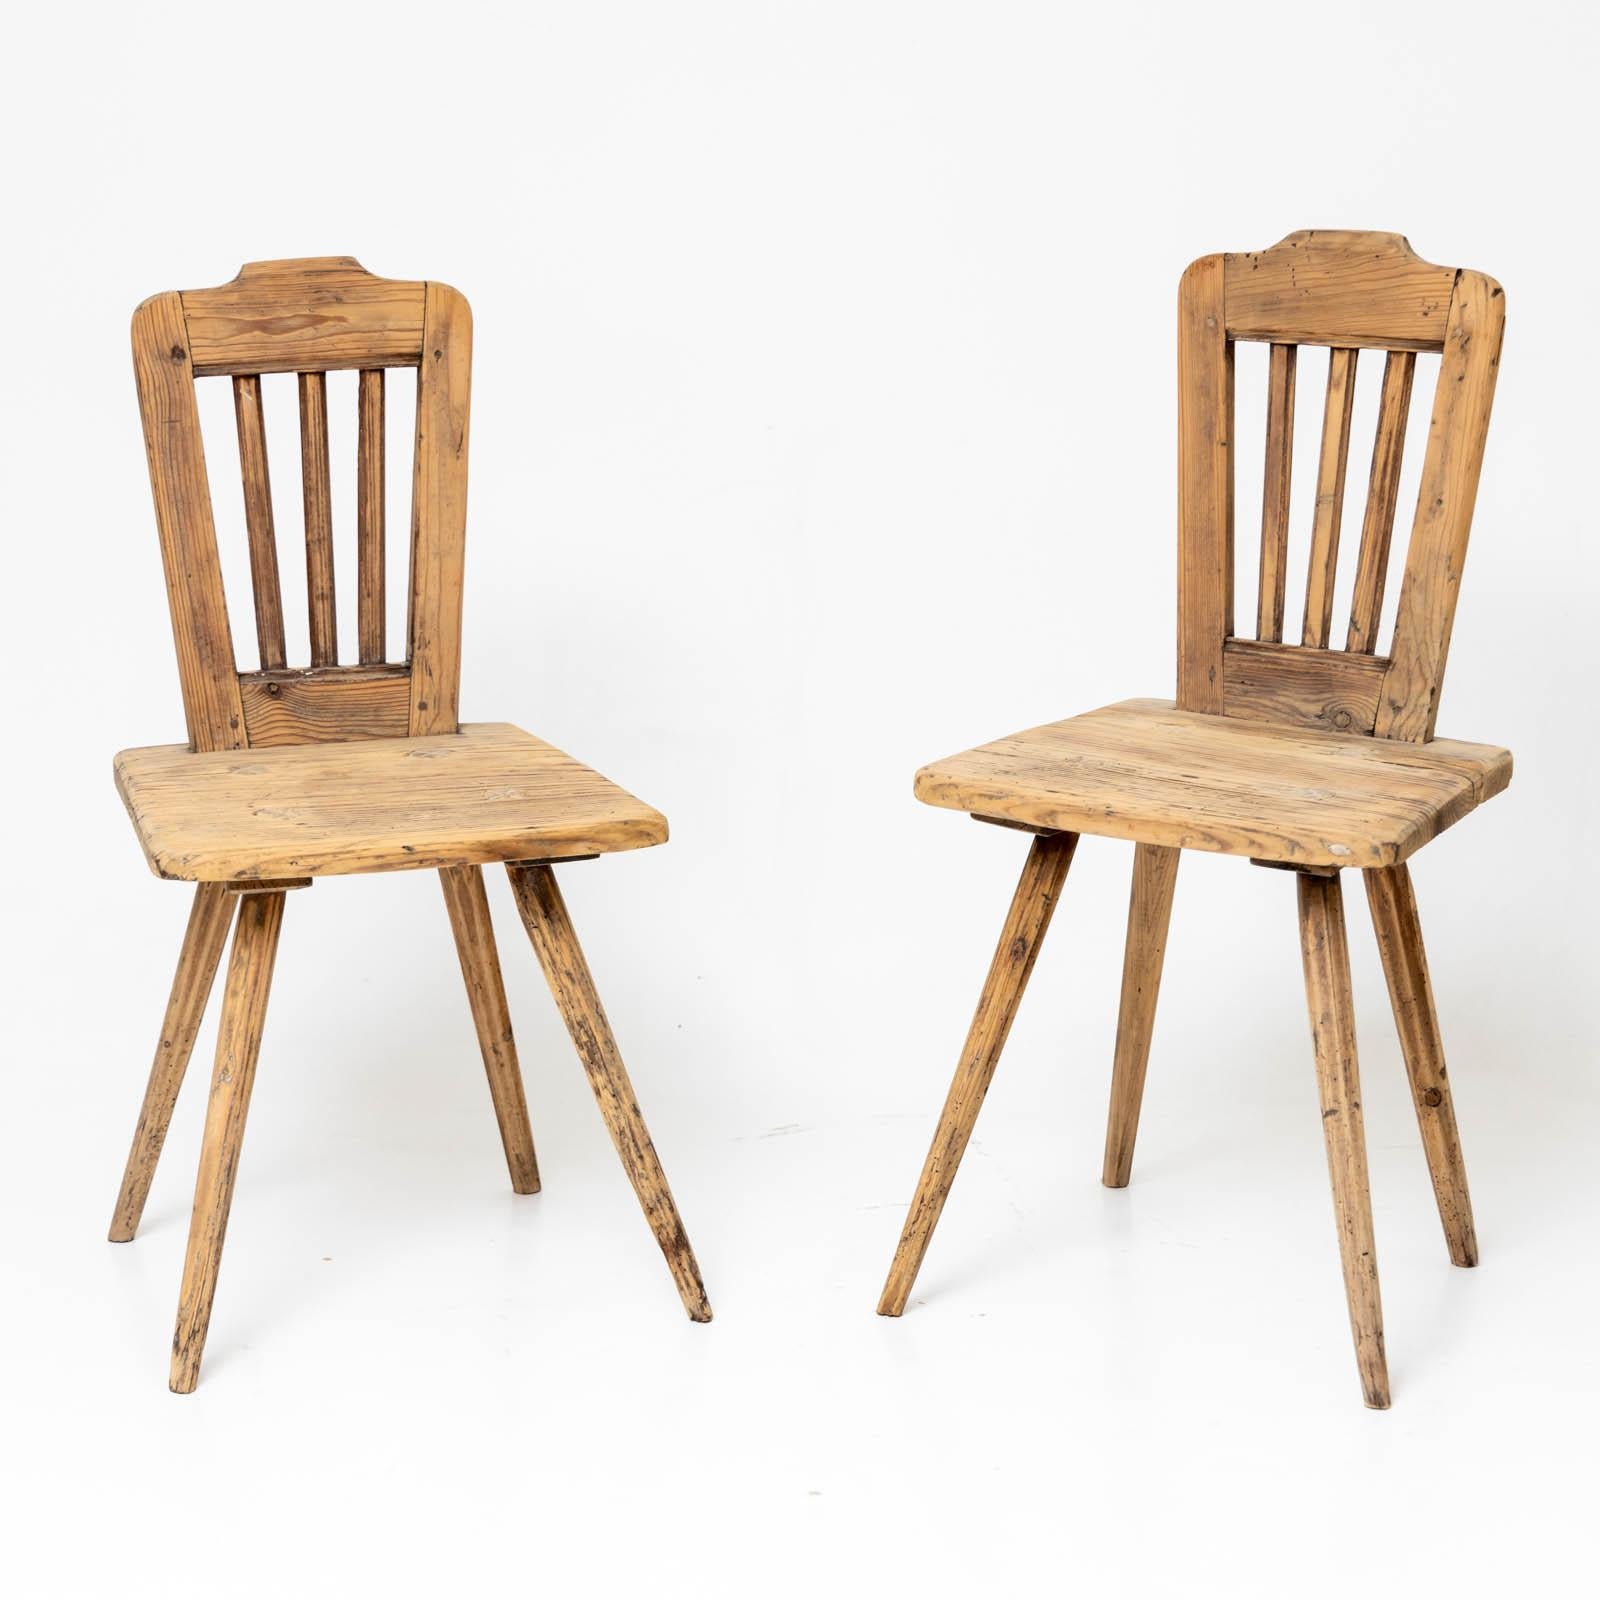 German Pair of rustic softwood chairs, 19th century